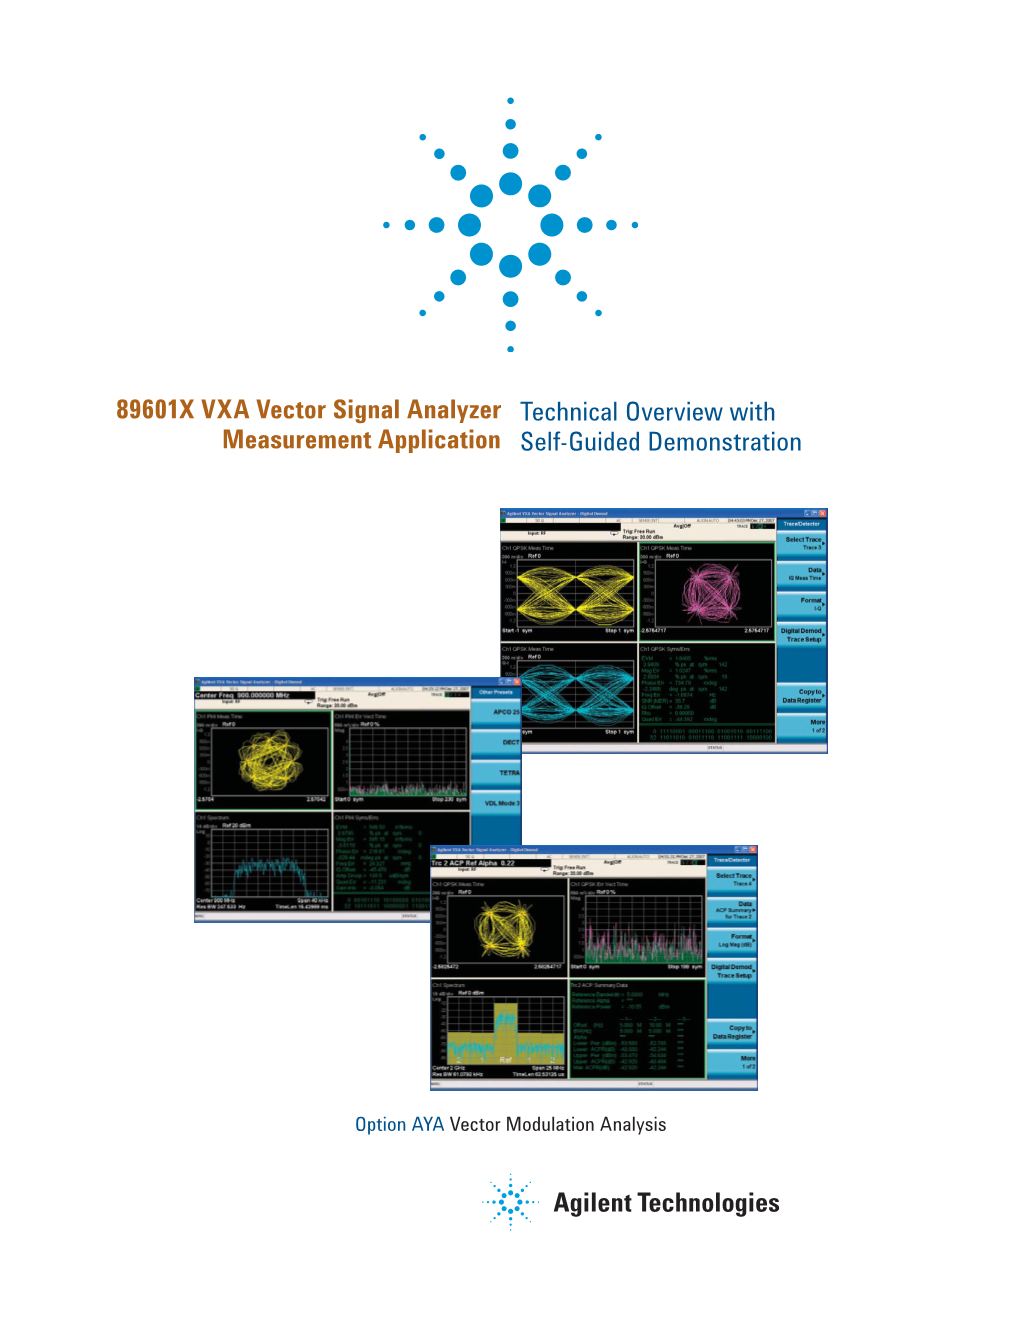 89601X VXA Vector Signal Analyzer Measurement Application Technical Overview with Self-Guided Demonstration